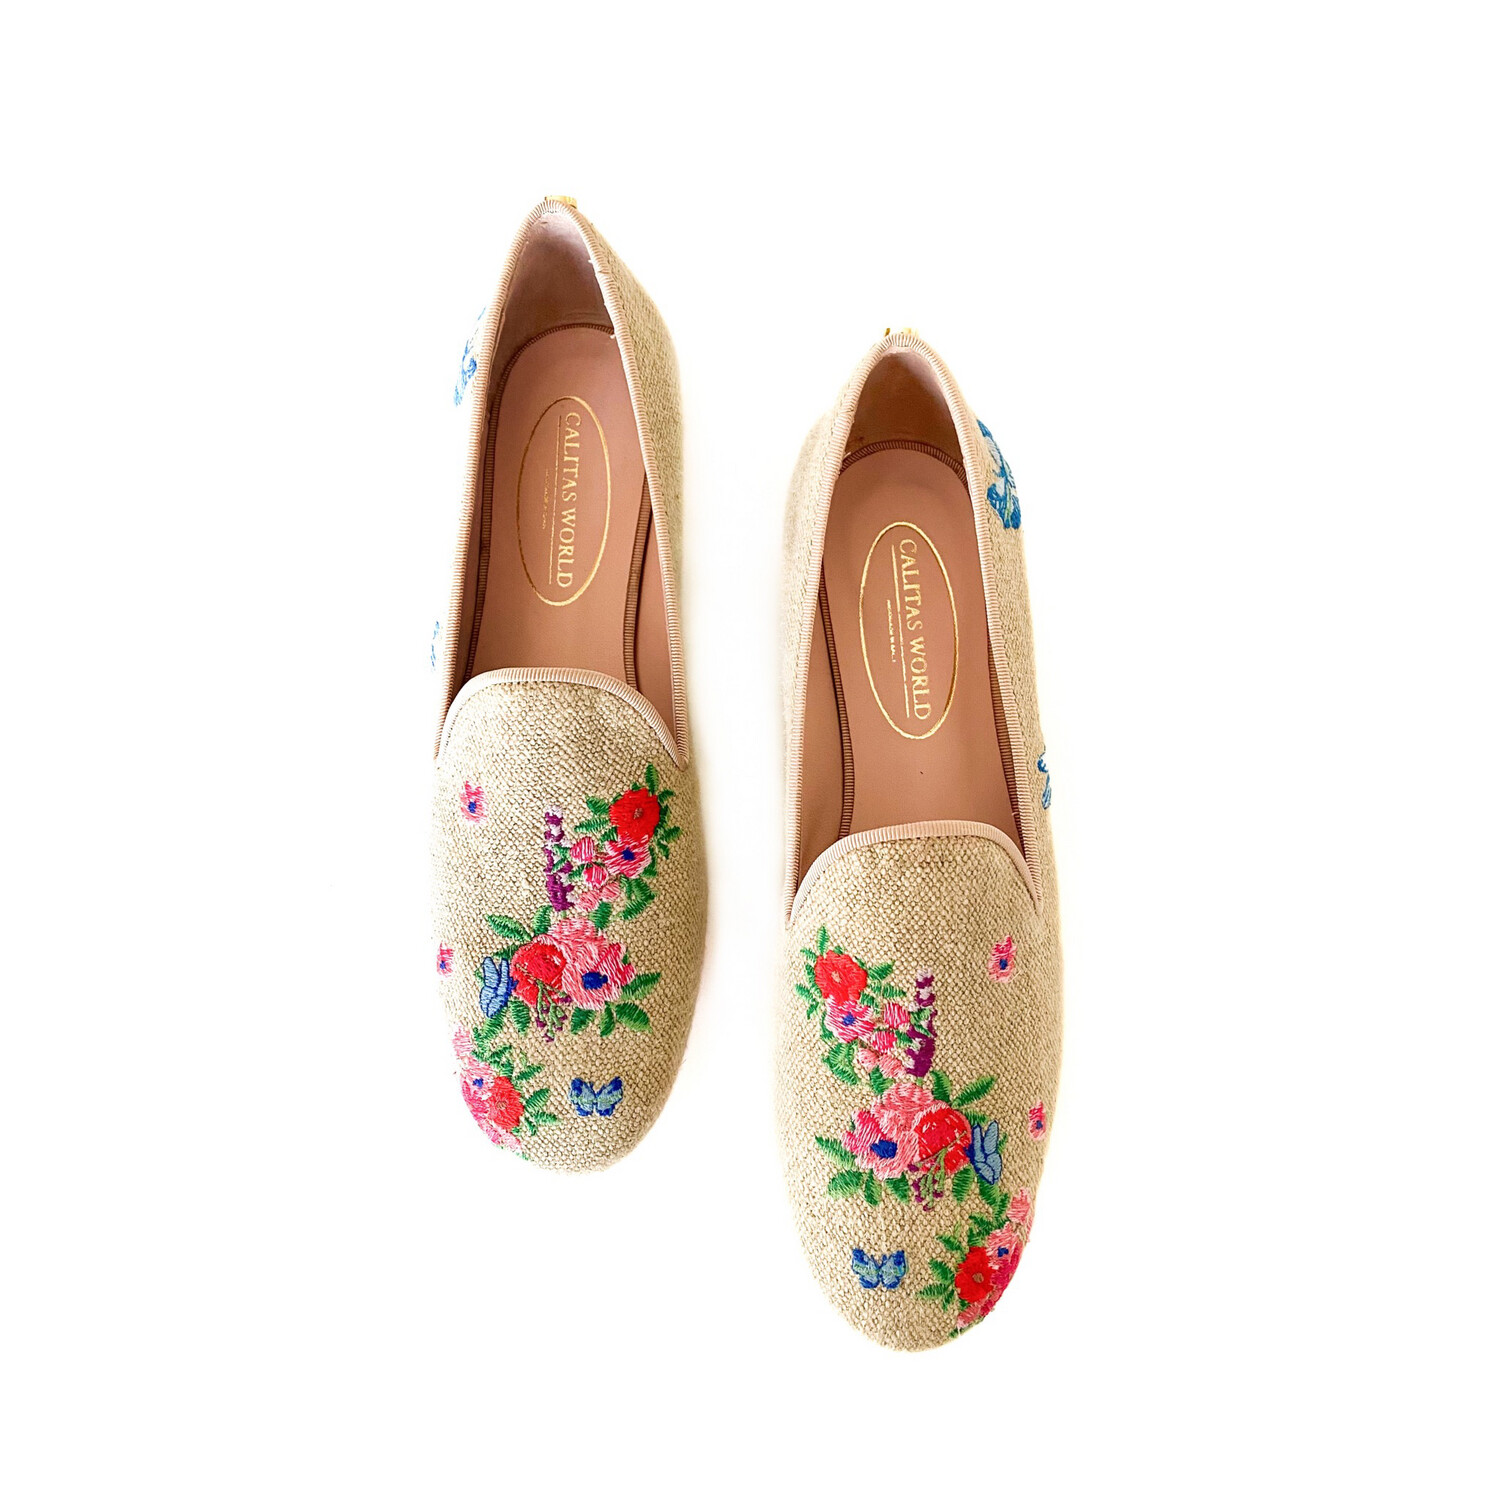 LOAFERS LINO NATURAL, FLORES Y MARIPOSAS